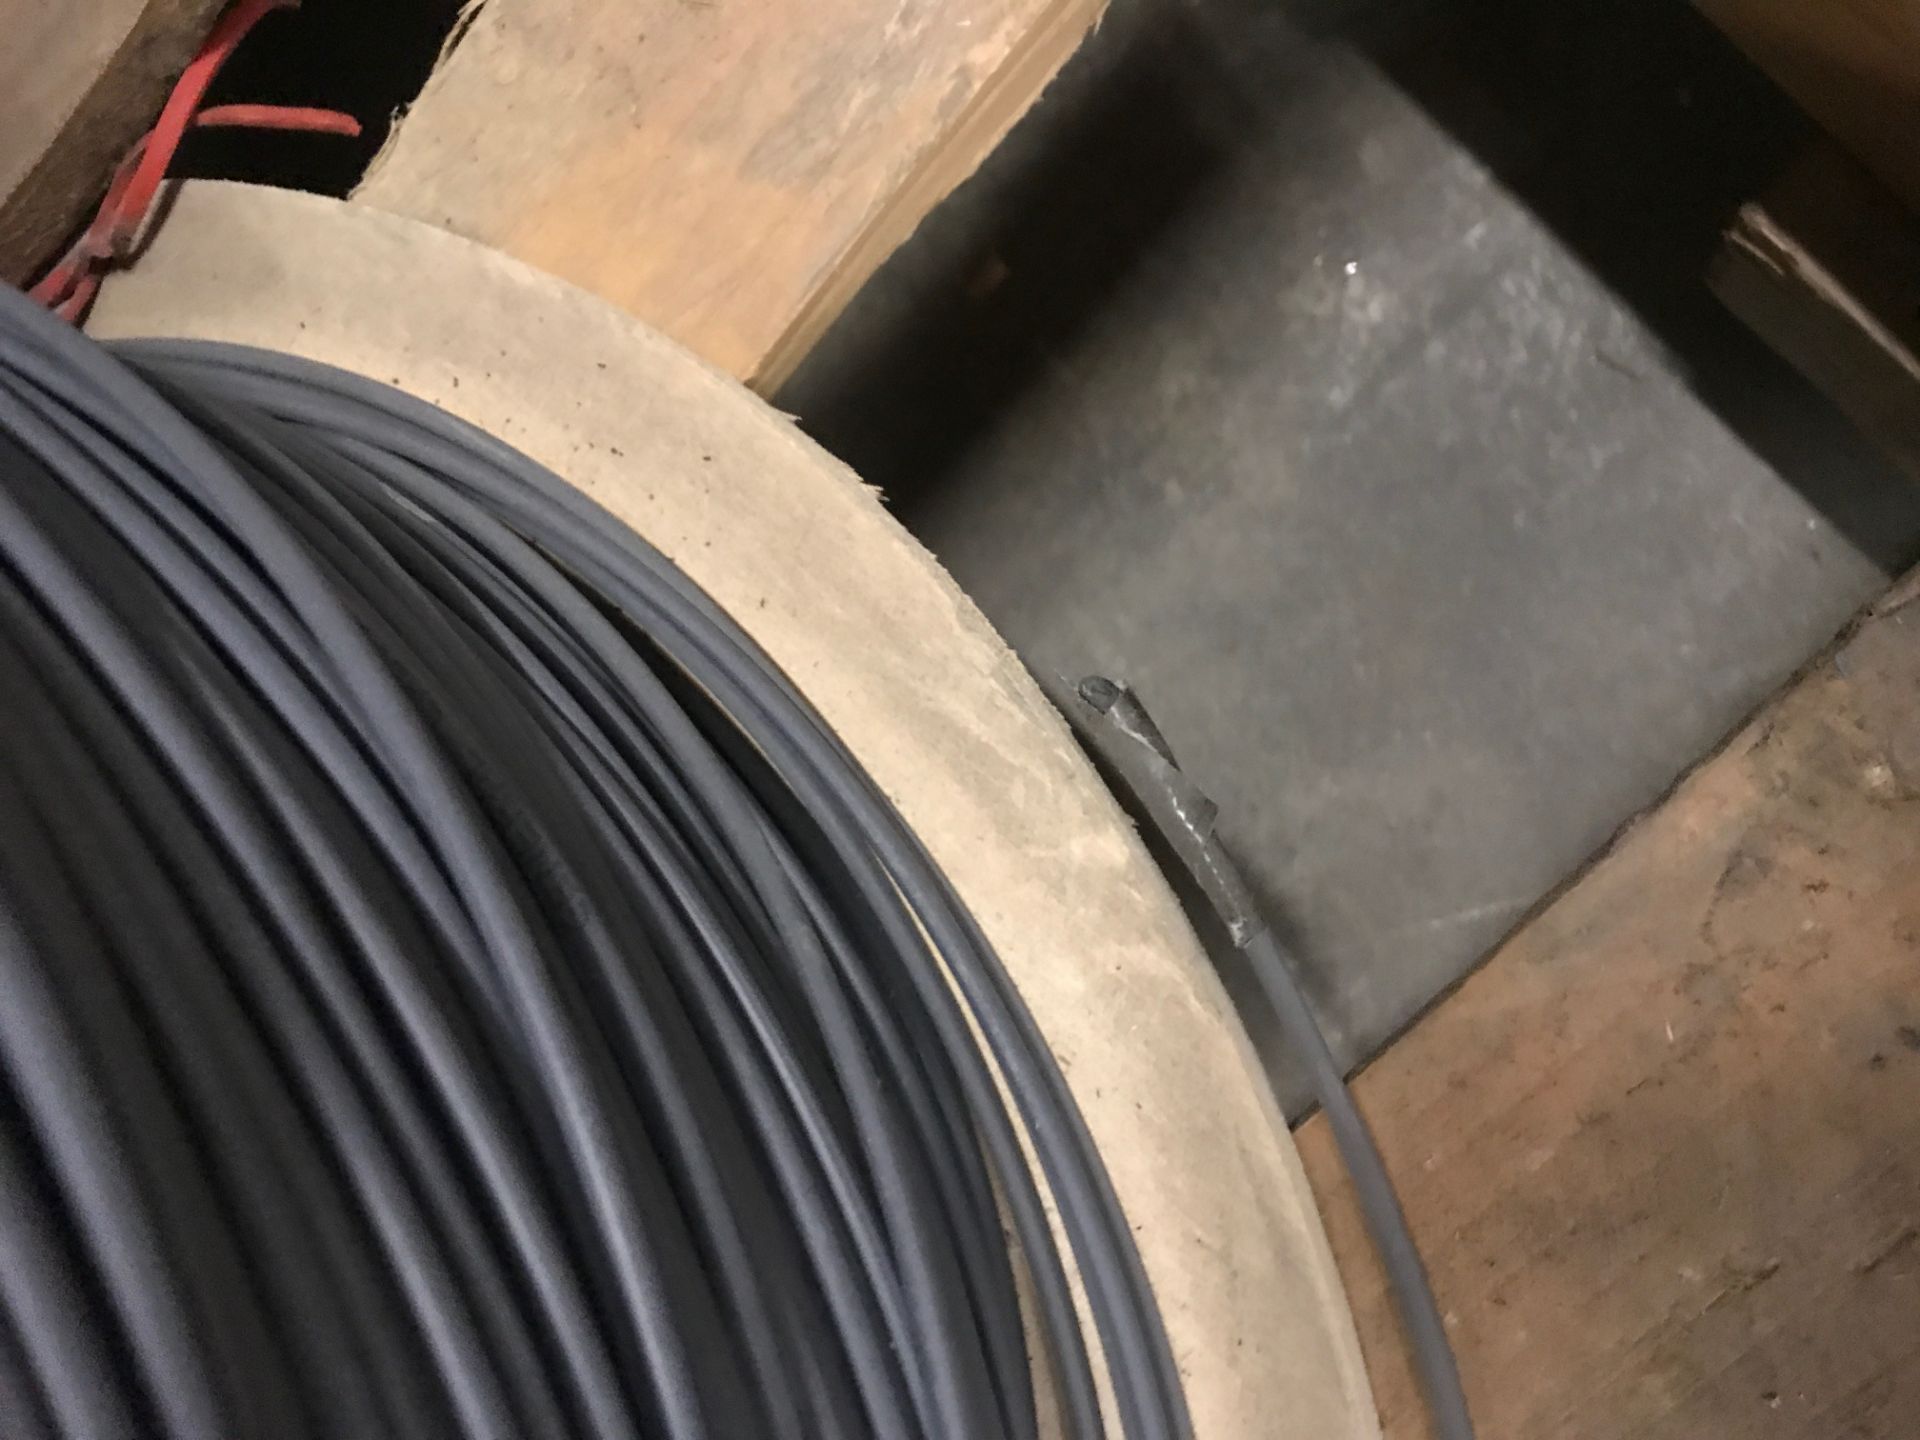 WIRE XLPO 14AWG 19X27 600V 110-125DEG C, 6000 FT, TOTAL WEIGHT 43KG (81080067S) - Image 2 of 2